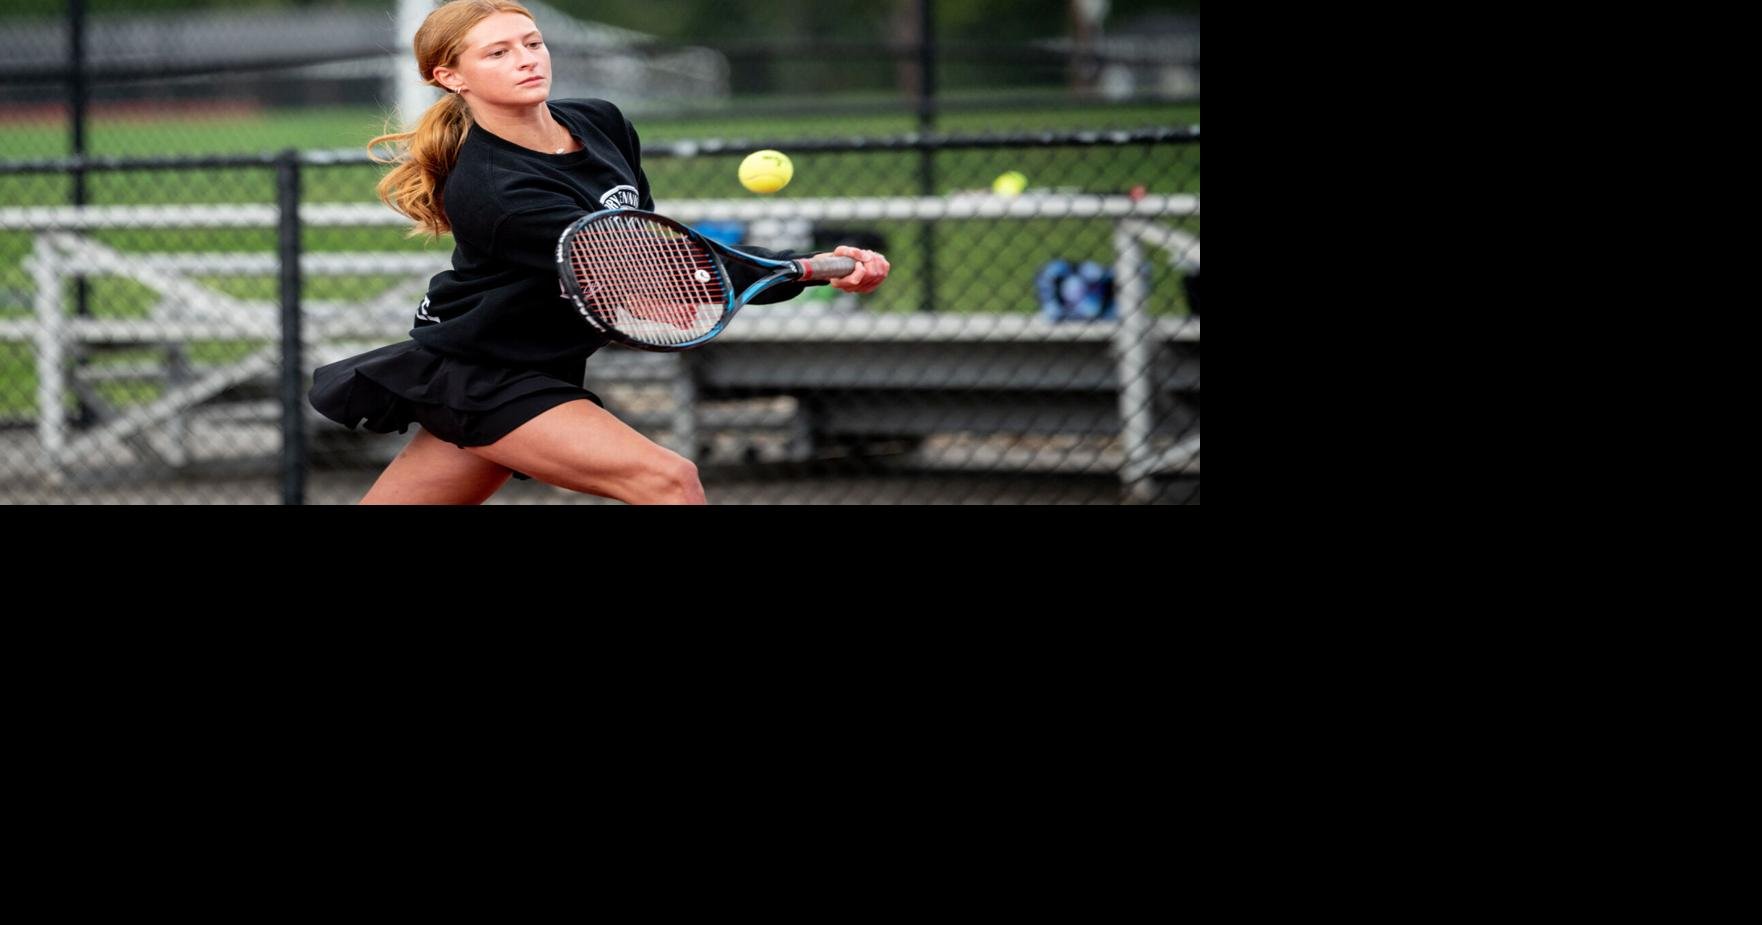 Hickory tennis standouts ready to take court in D10 tournament Local